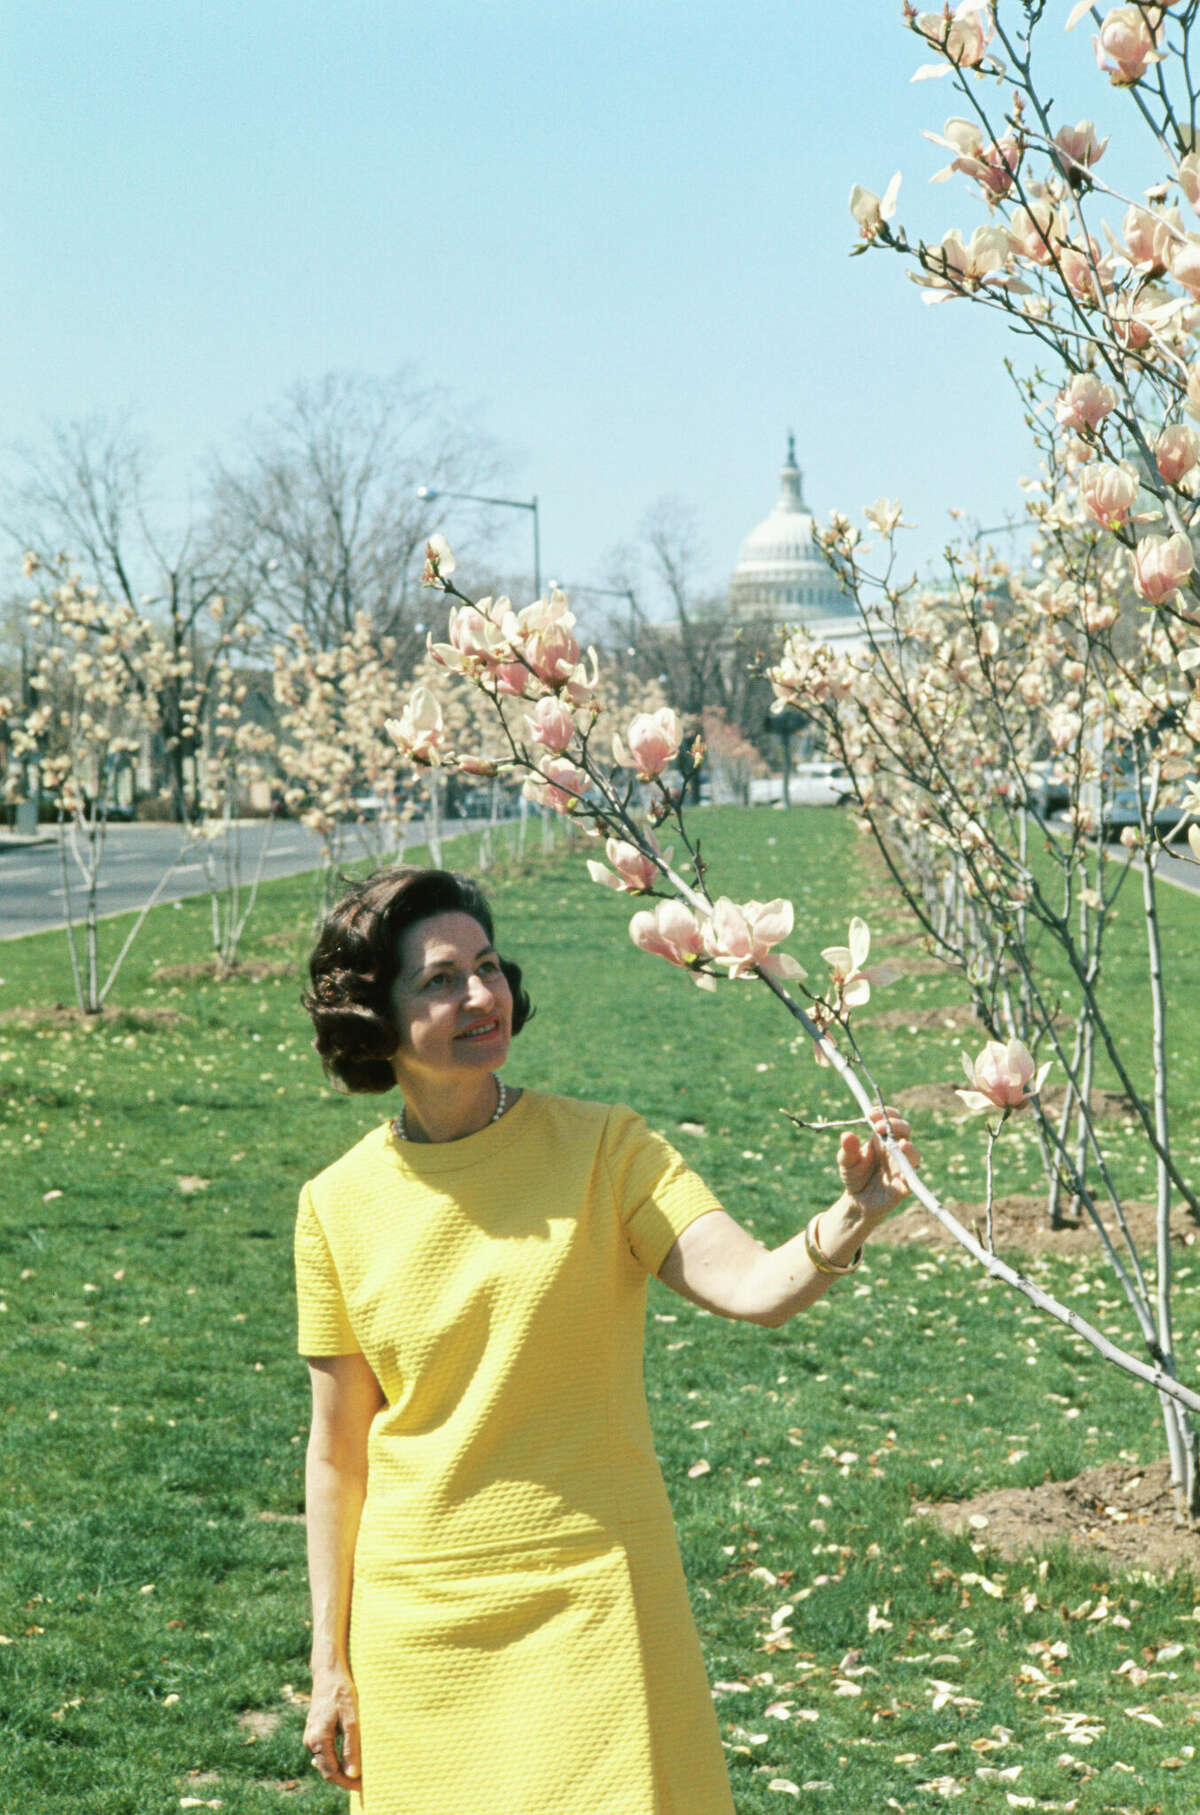 Mrs. Lyndon B. Johnson Tours The Blossoming Capitol Here. She Was Accompanied By Nash Castro, The Regional Director Of The National Park Service.